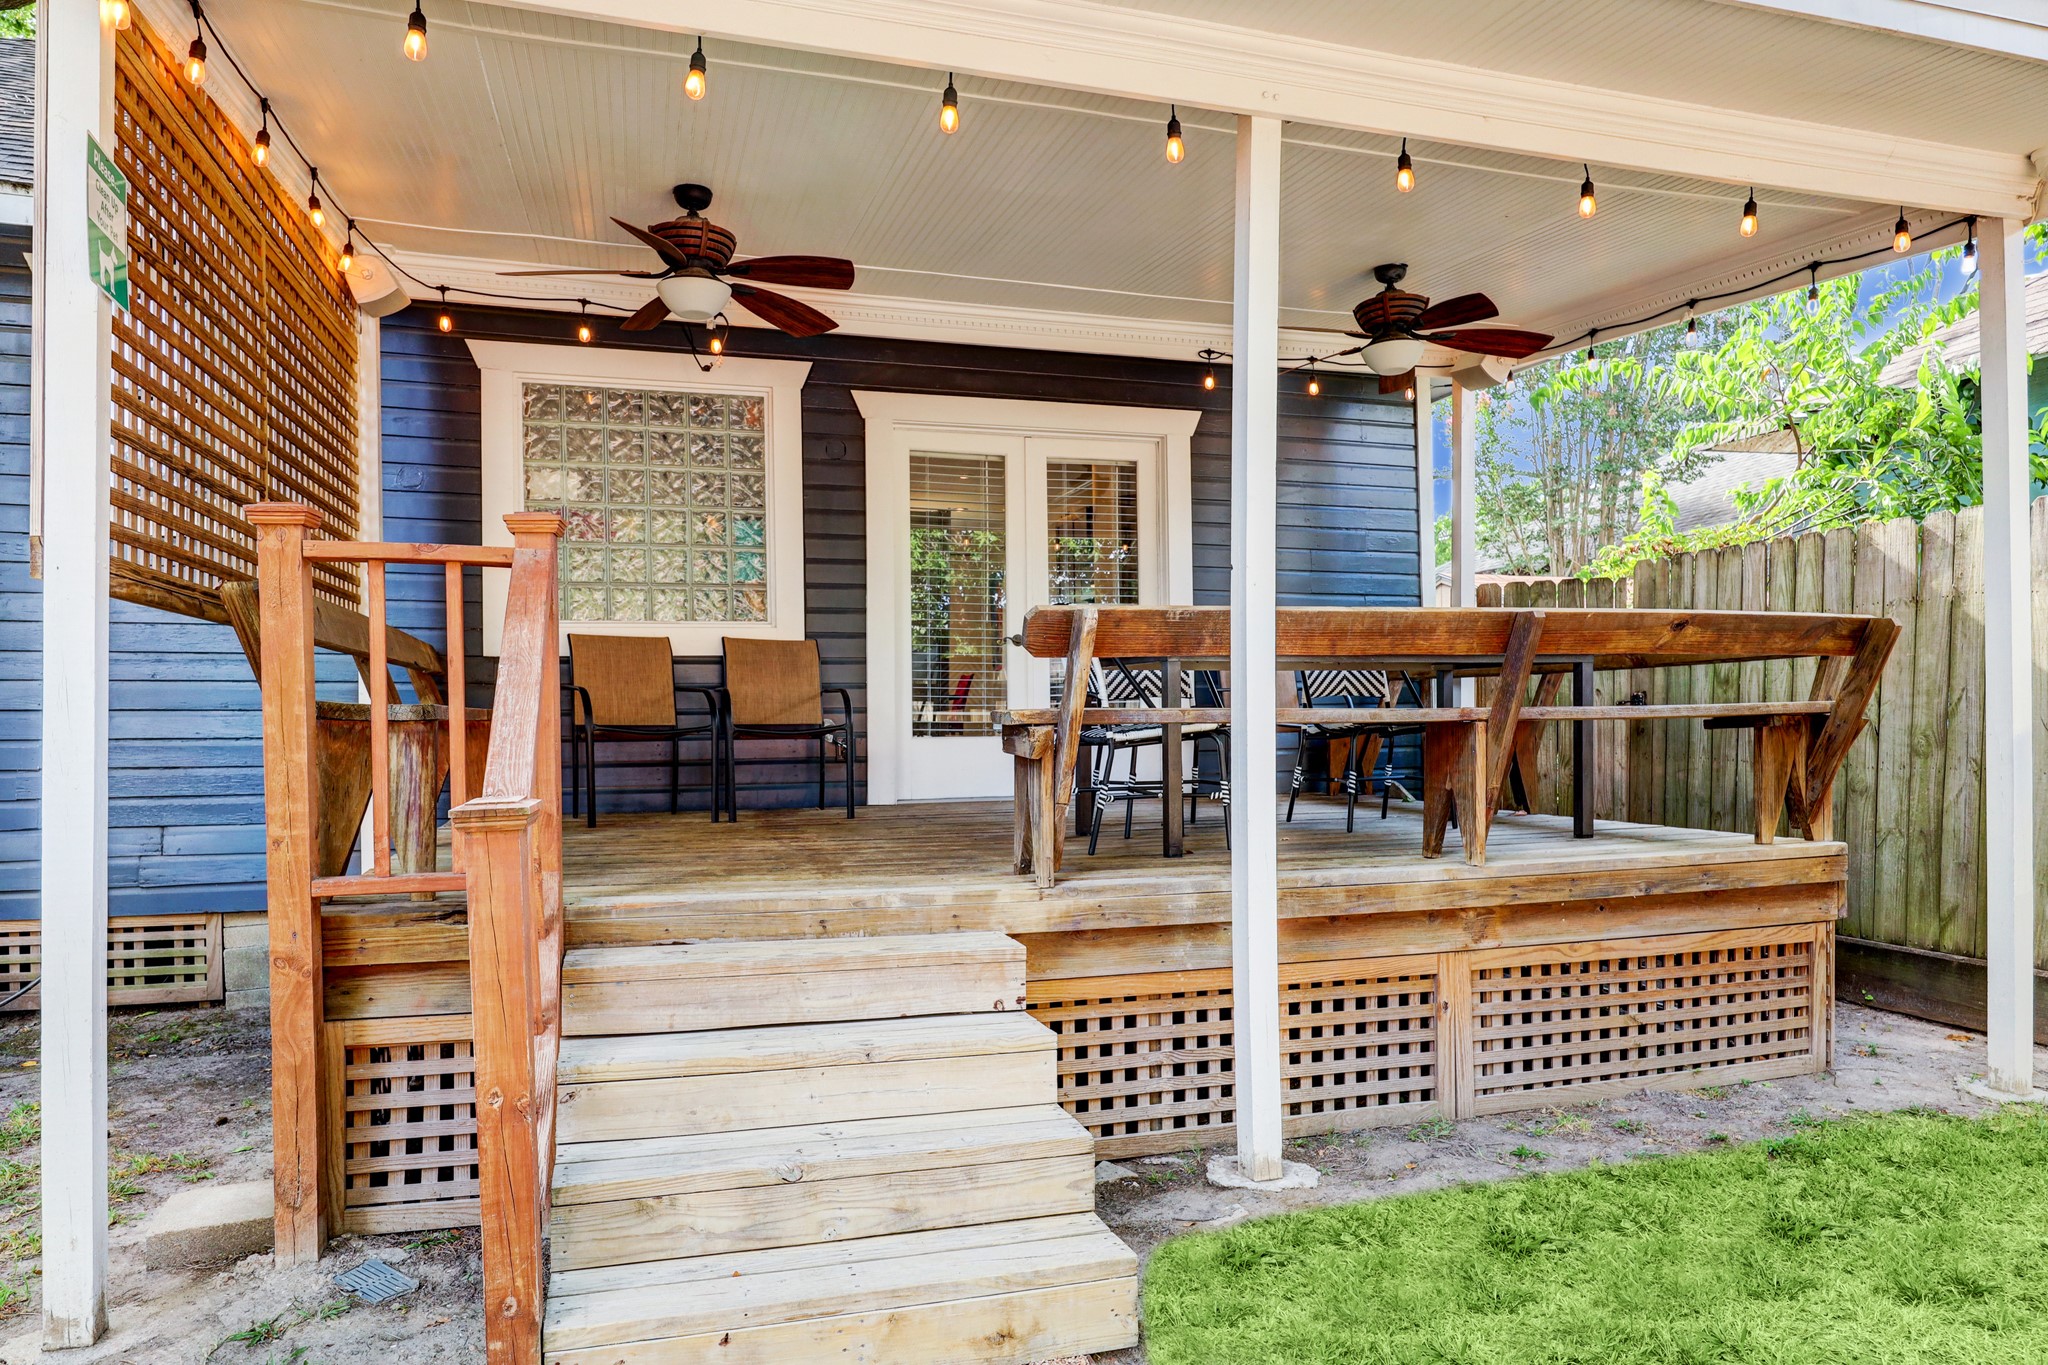 Charming back deck has built-in seating and plenty of room for more furniture.  2 ceiling fans provide a cool breeze and the eastern exposure provides afternoon shade.